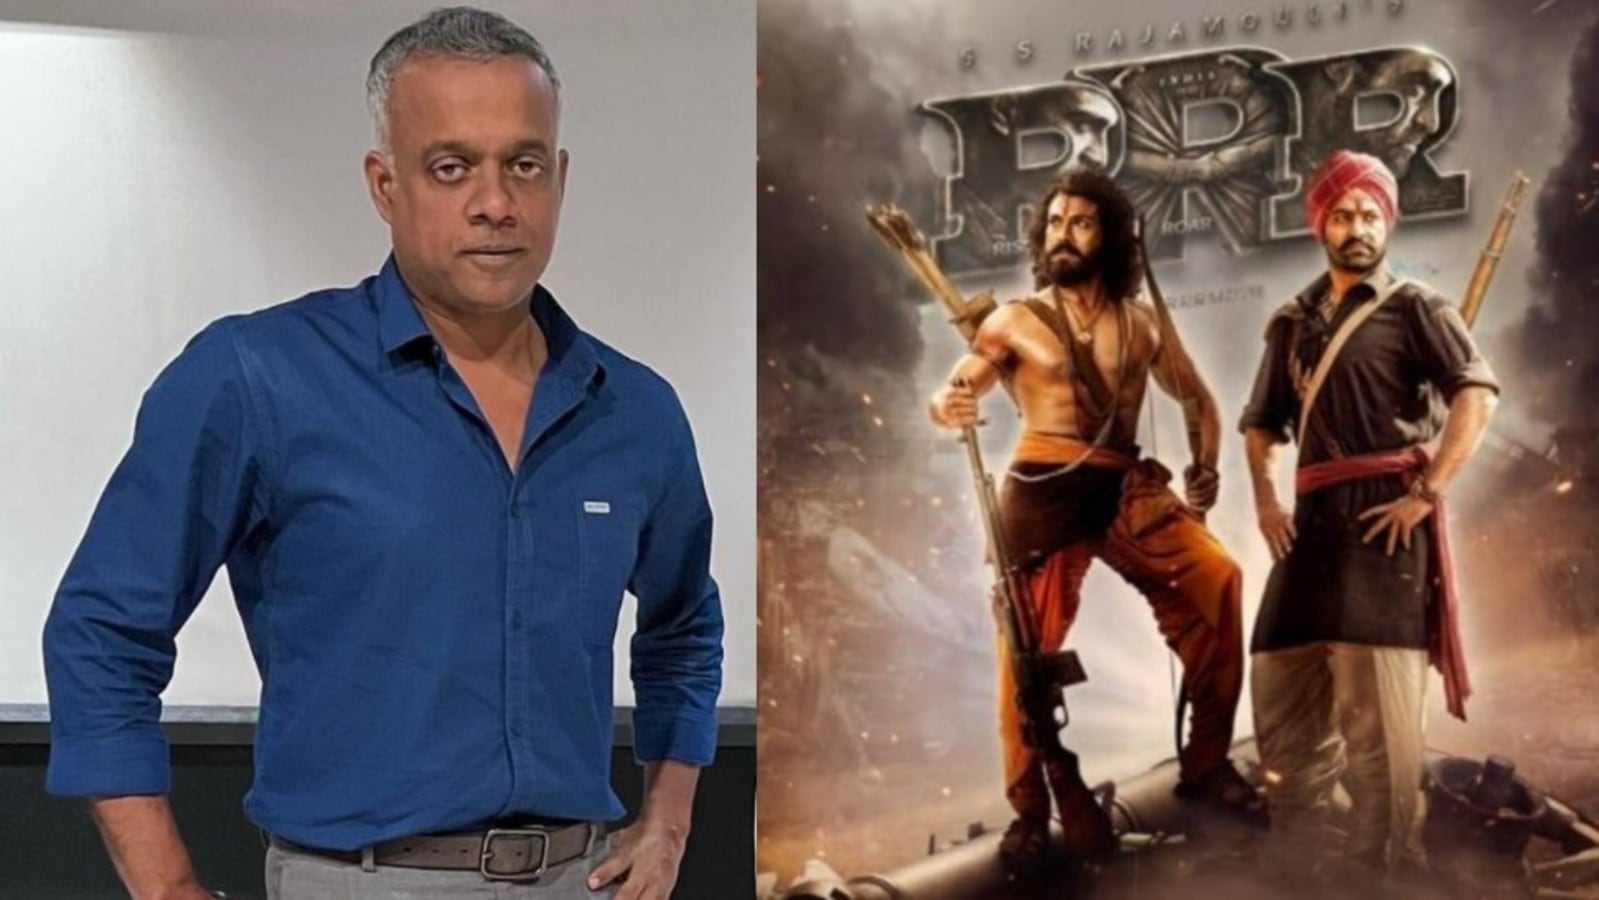 ‘I don’t know if RRR is Oscar material, honestly’, says director Gautham Menon